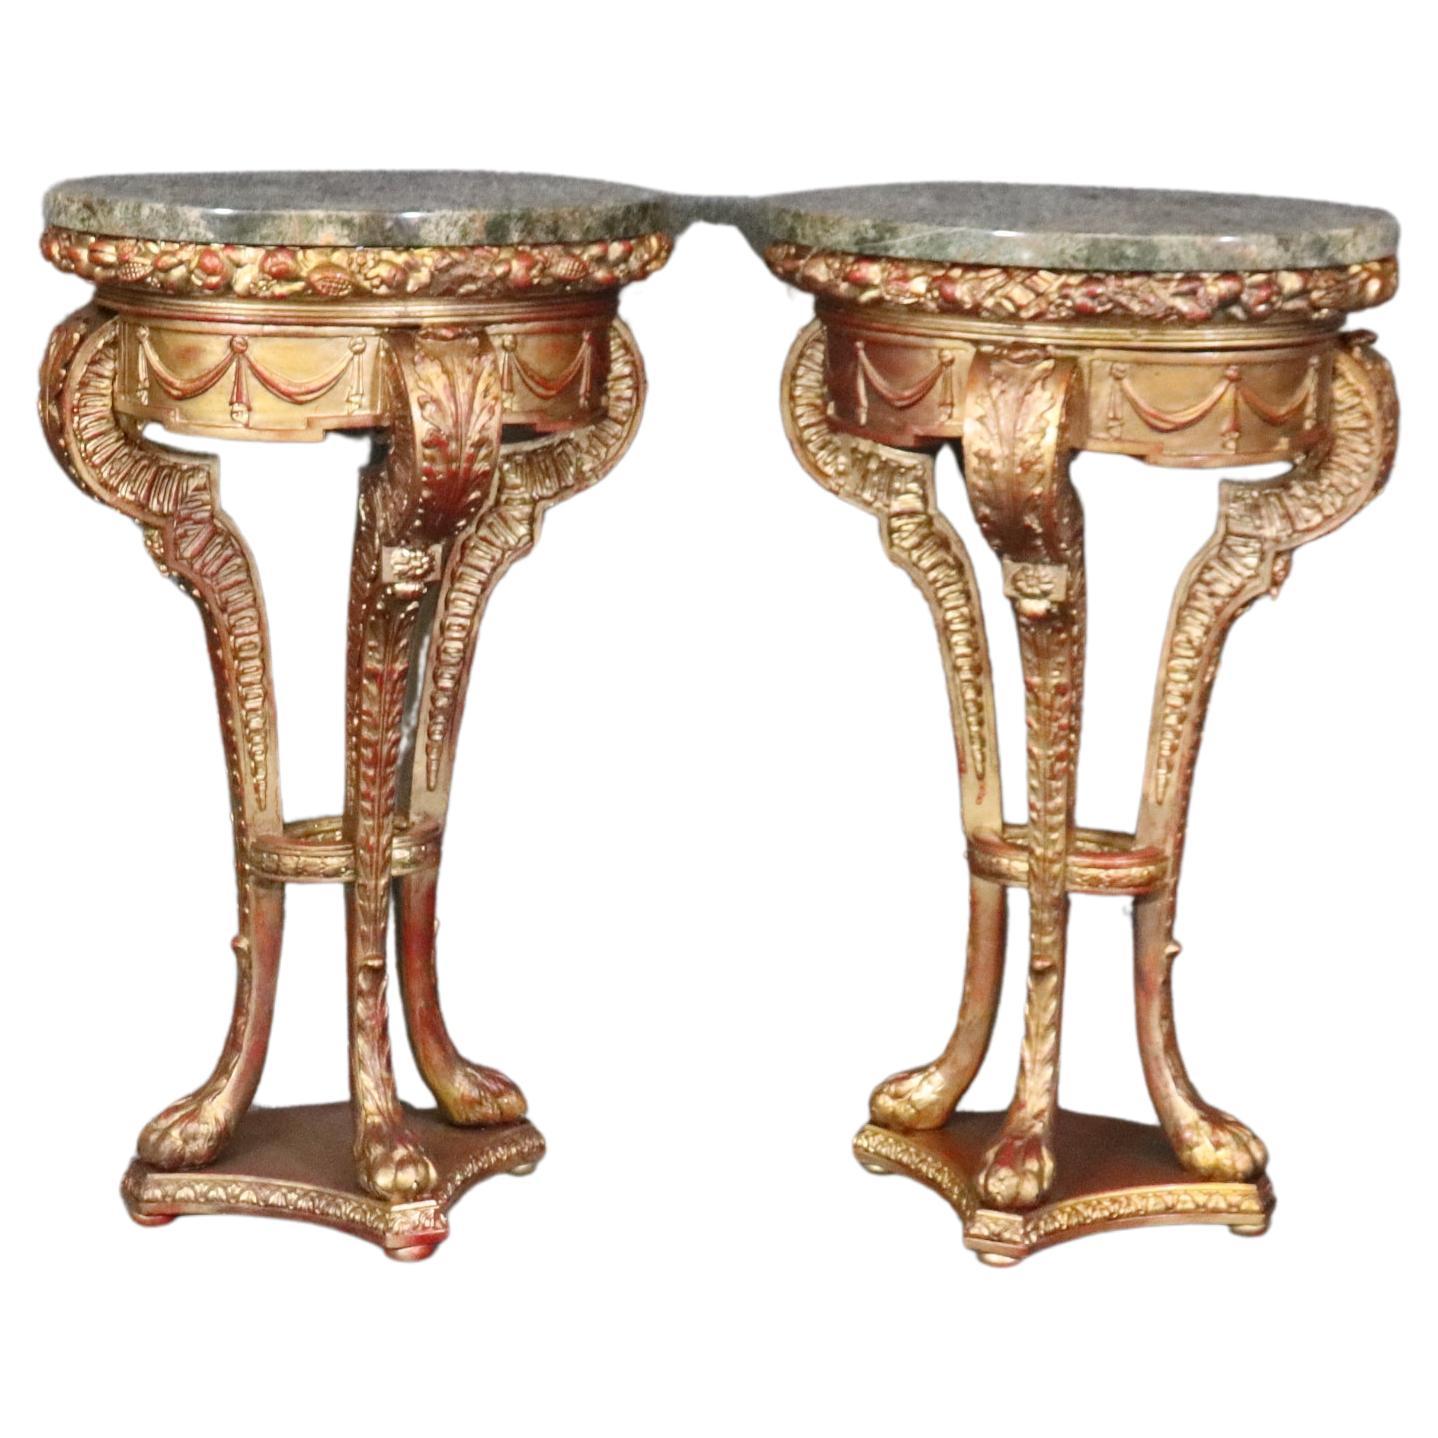 Superb Pair Gilded French Carved Louis XV Style Verdi Marble Top Pedestals 